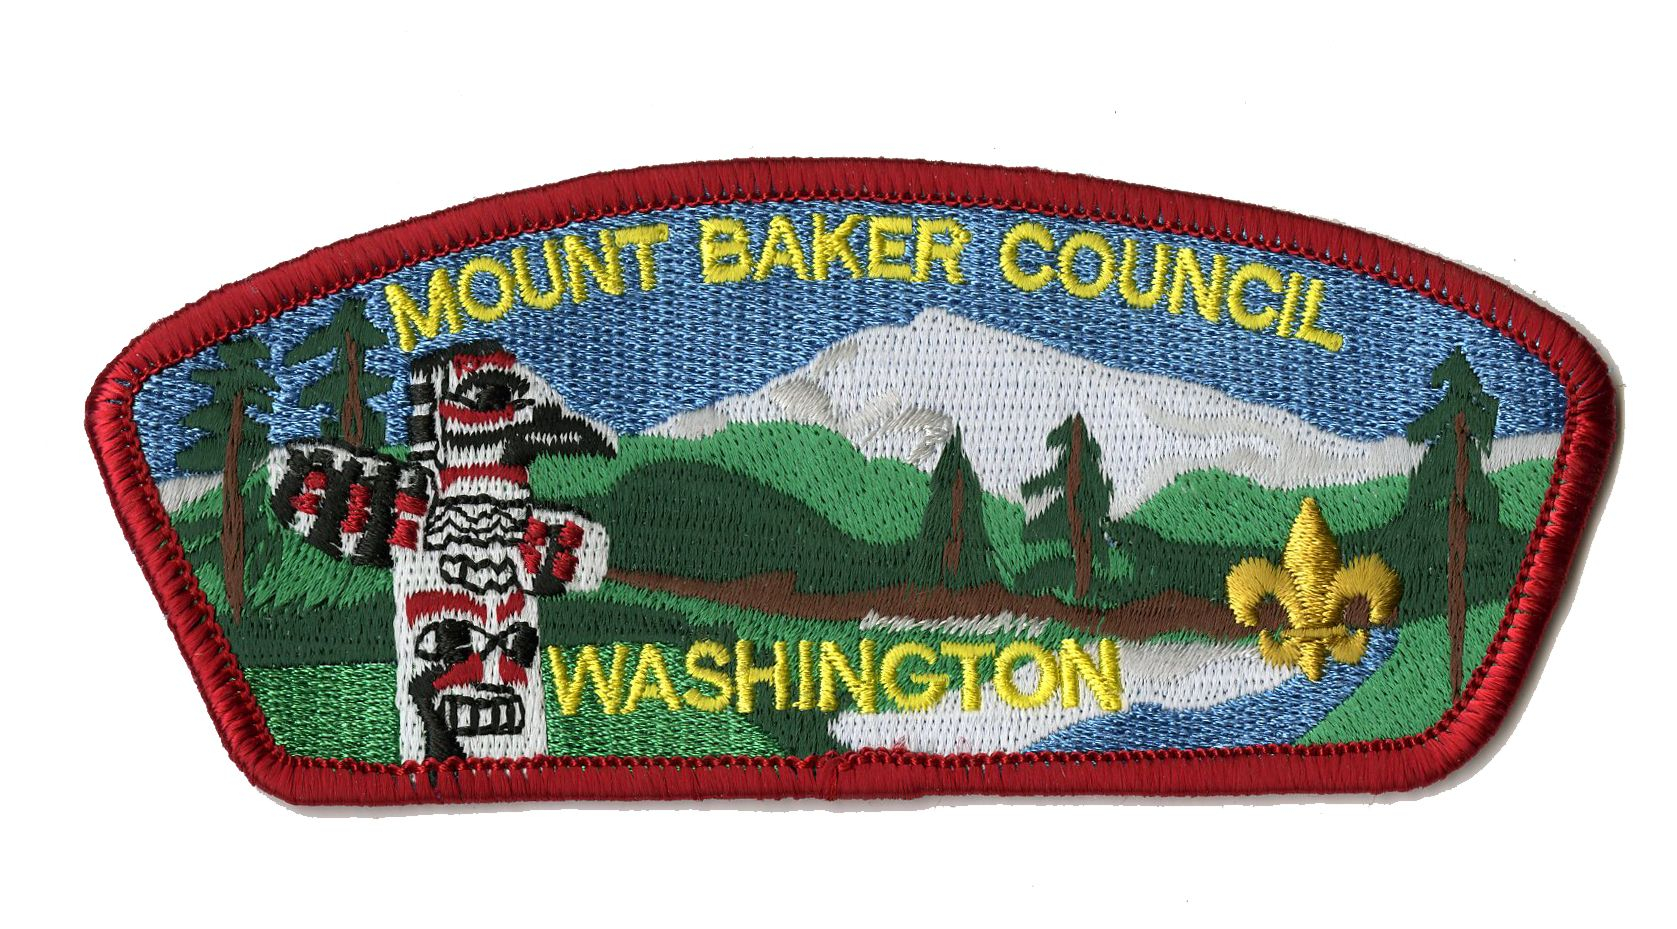 BSA Boy Scouts 3"x3" Embroidered Patch Hart Scout Reservation Phila Council 